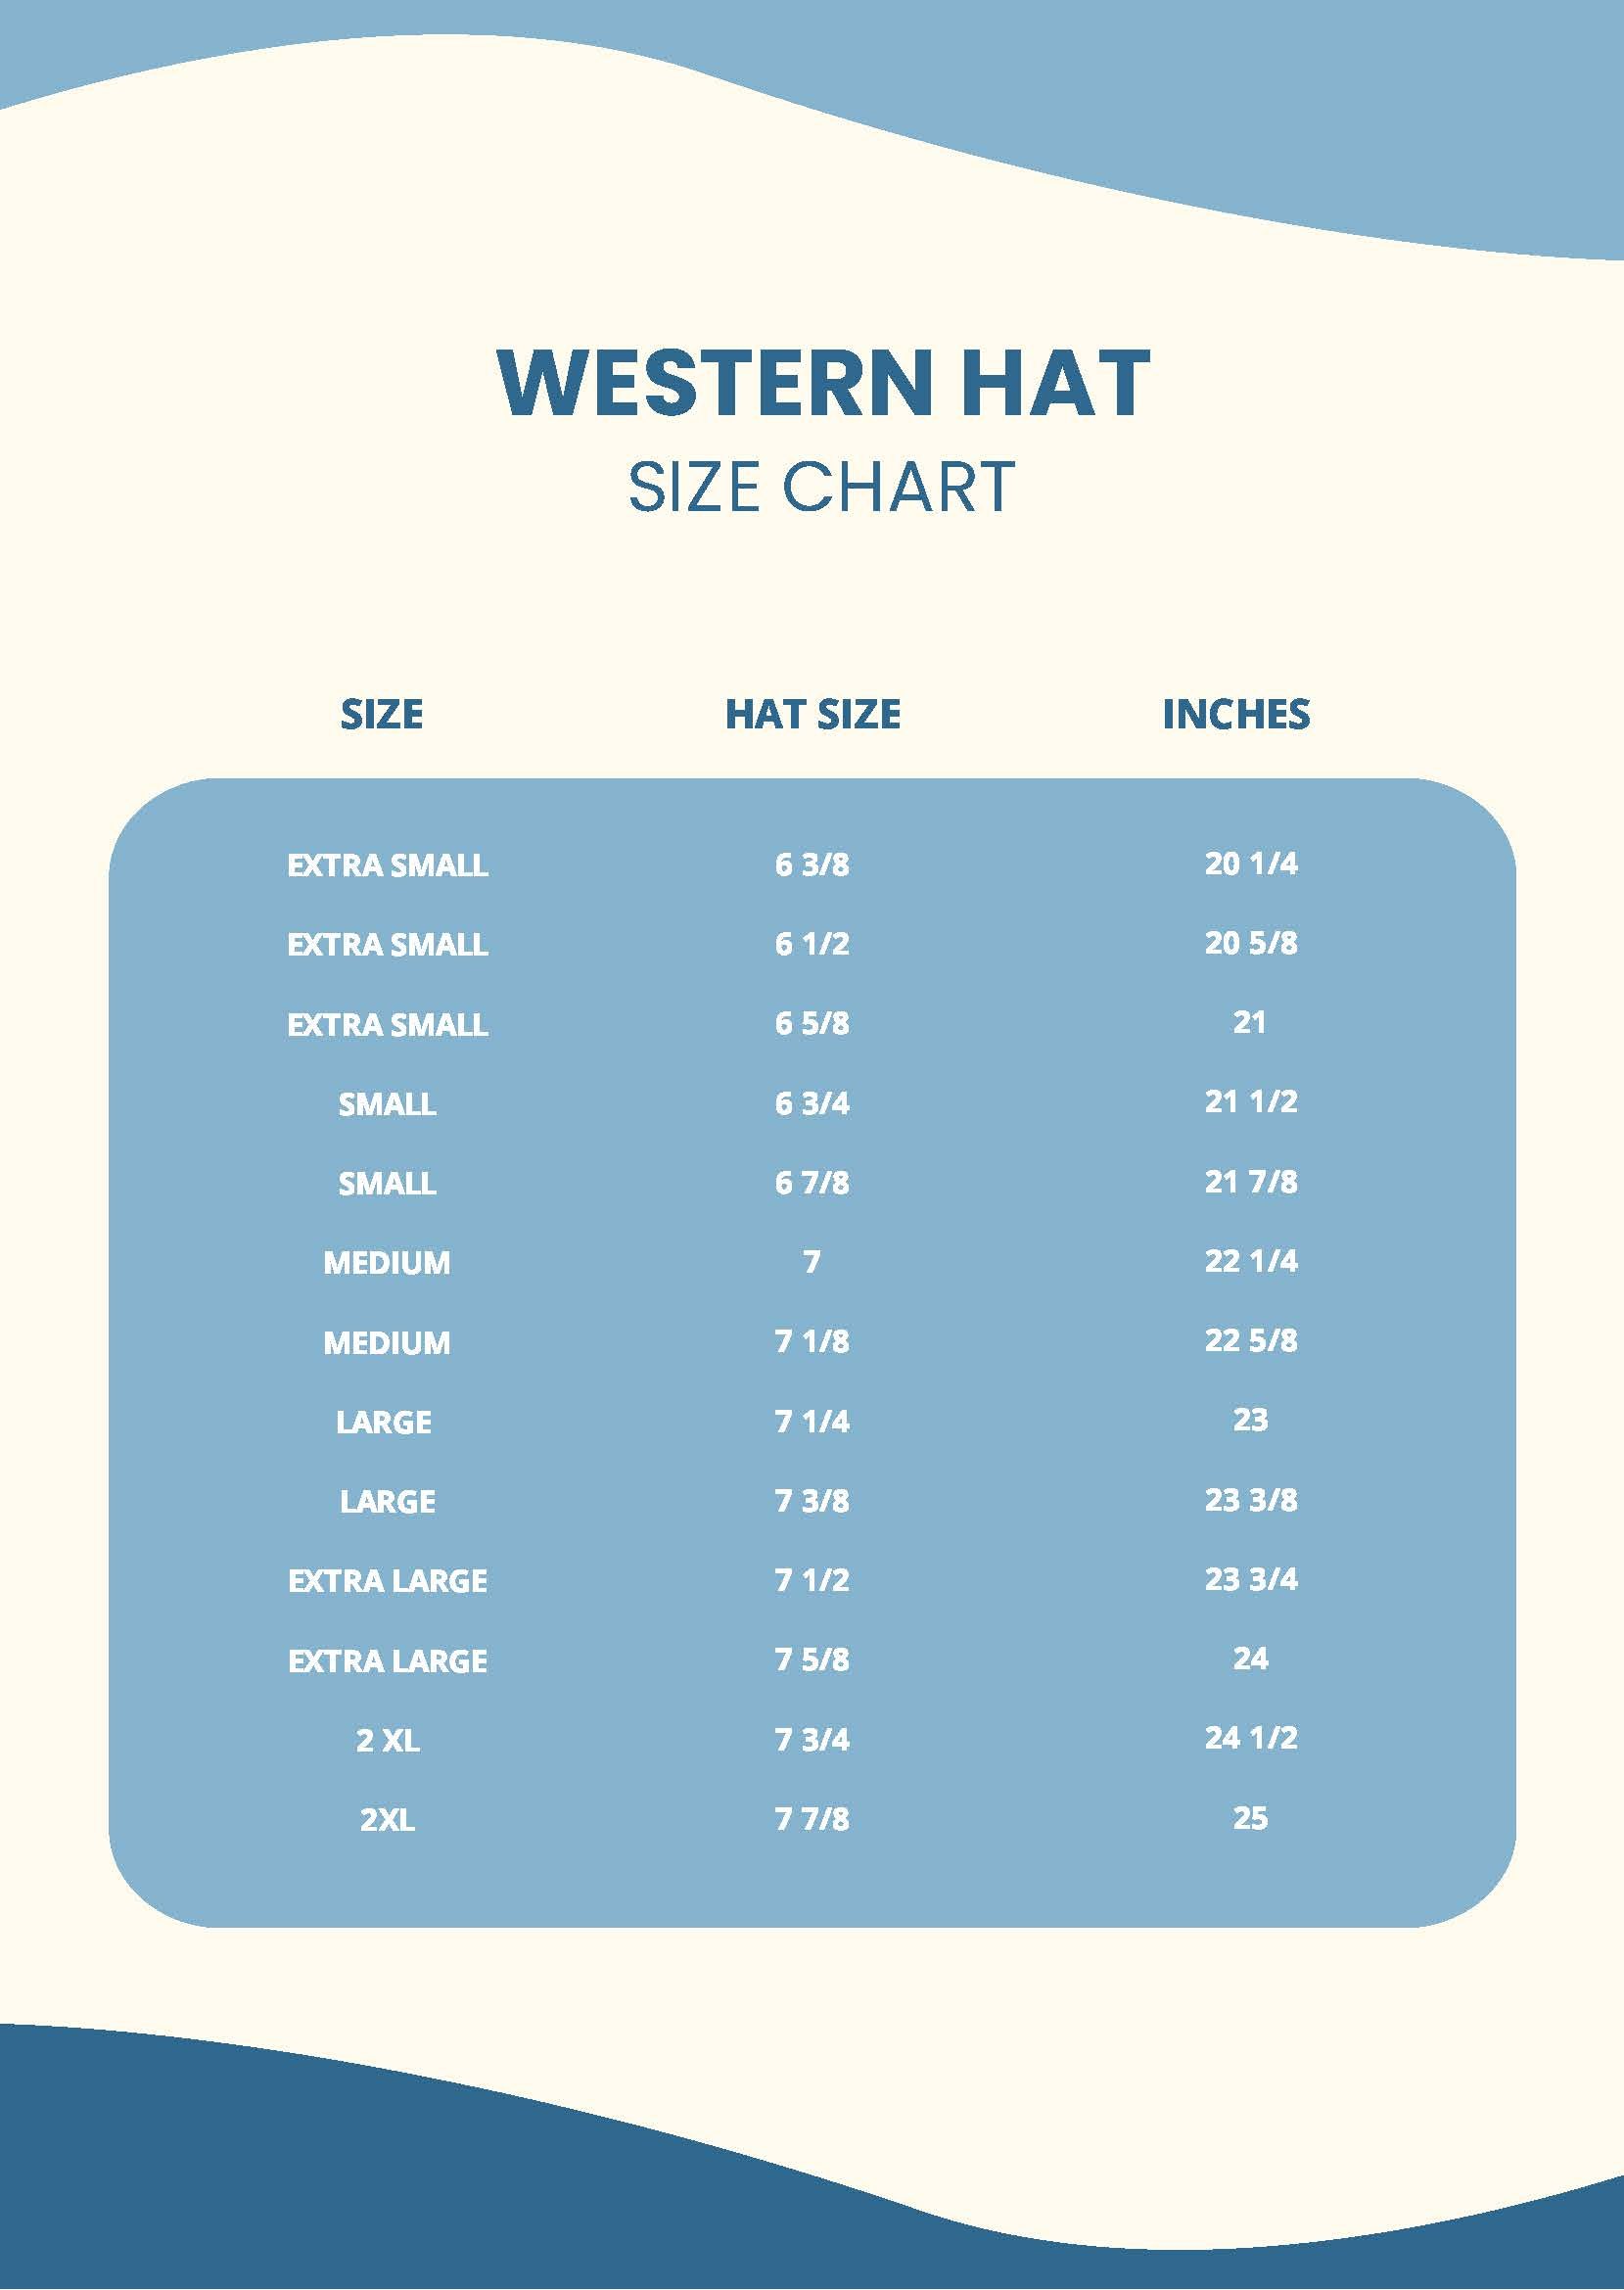 Free Childrens Hat Size Chart - Download in PDF | Template.net